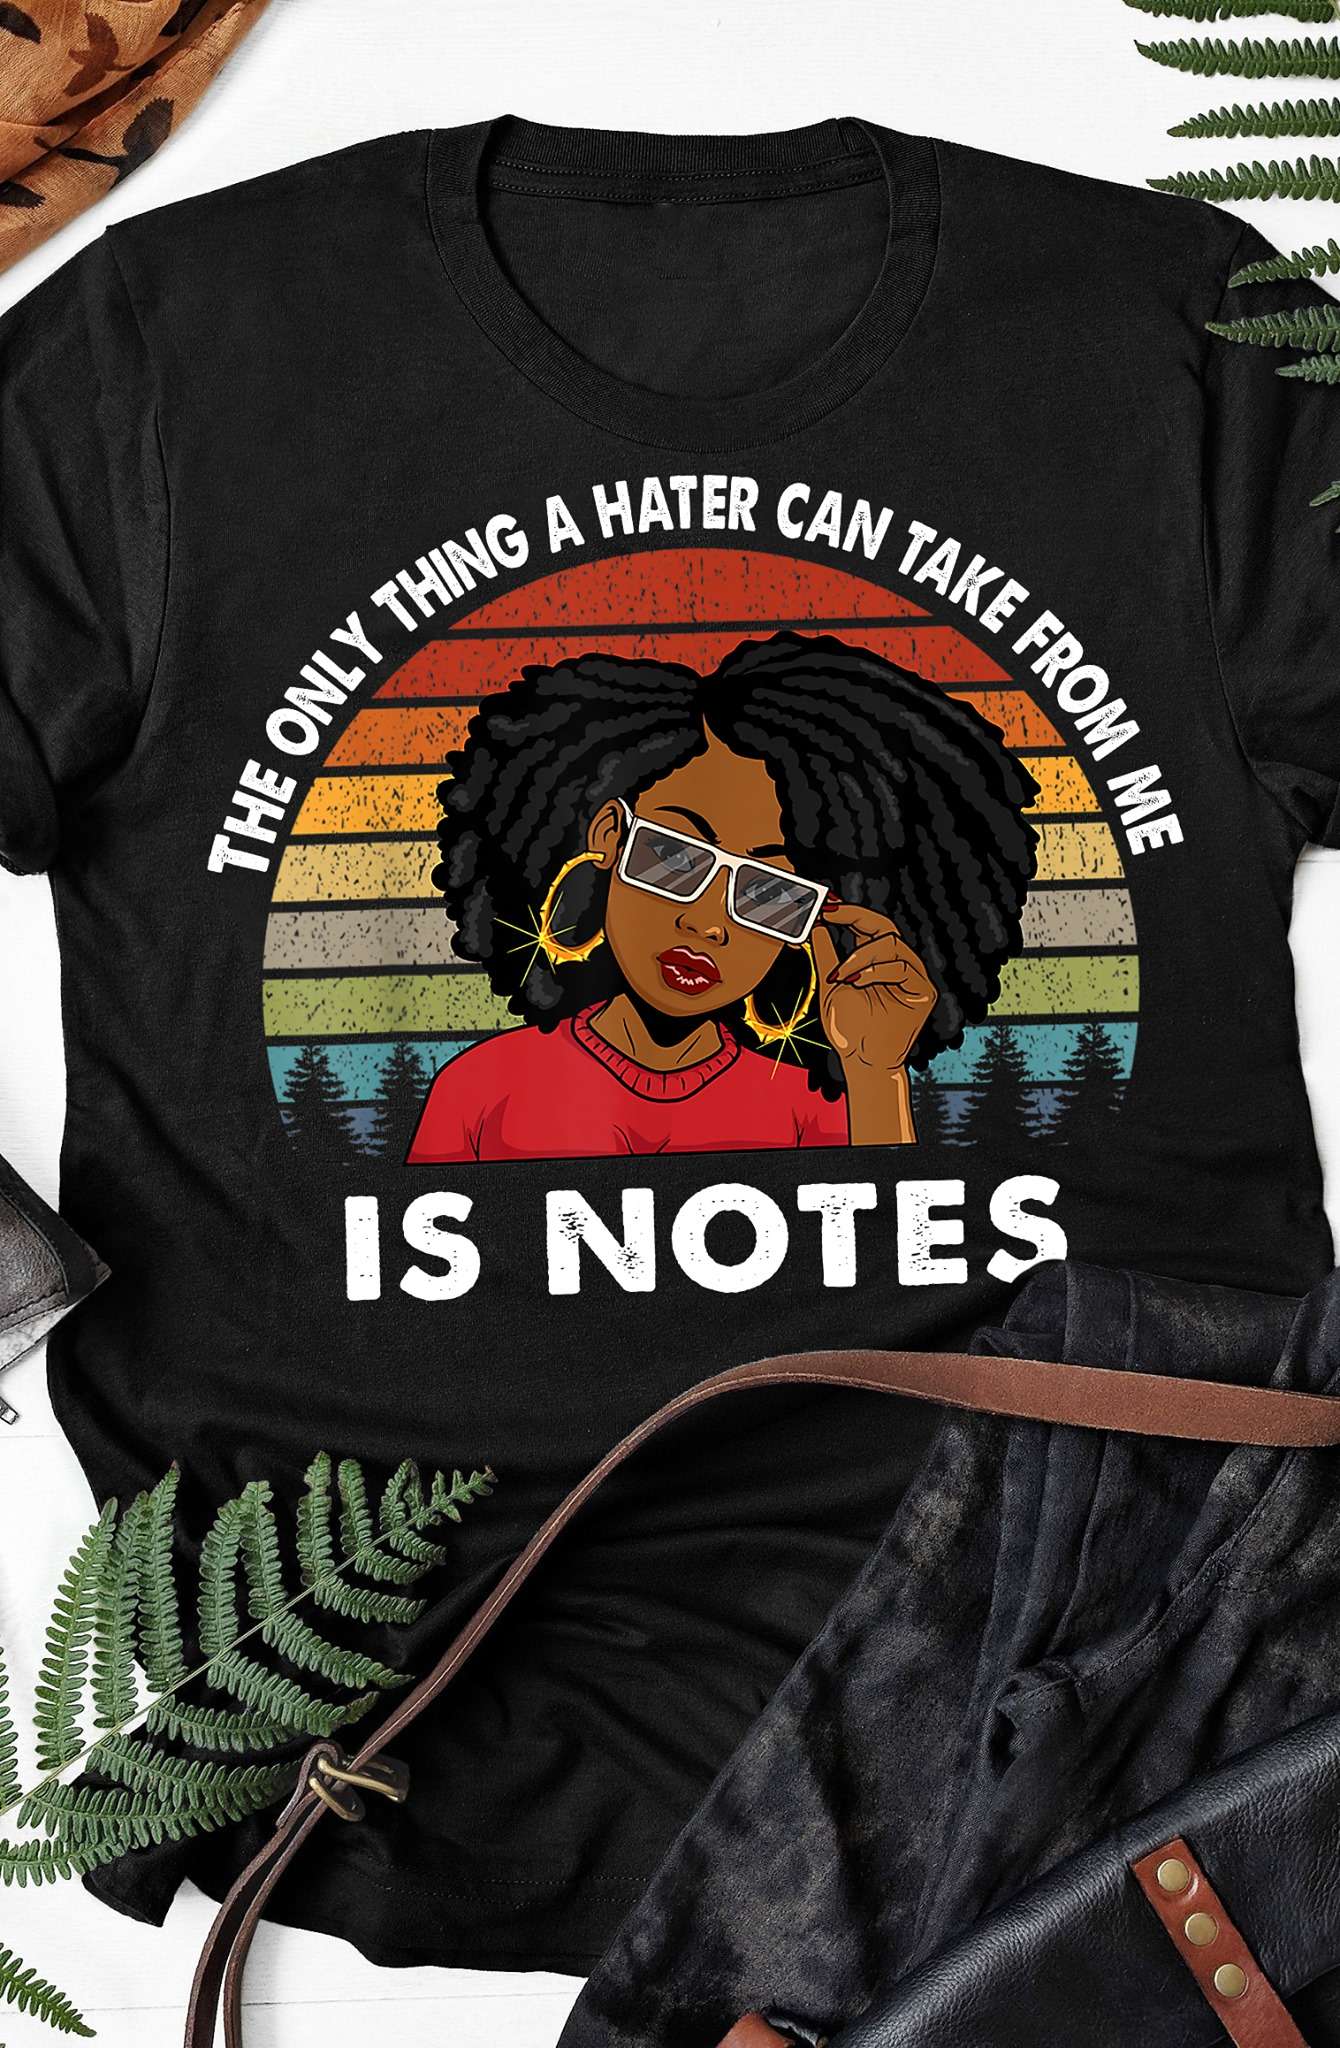 The only thing a hater can take from me is notes - Dope black woman, black community